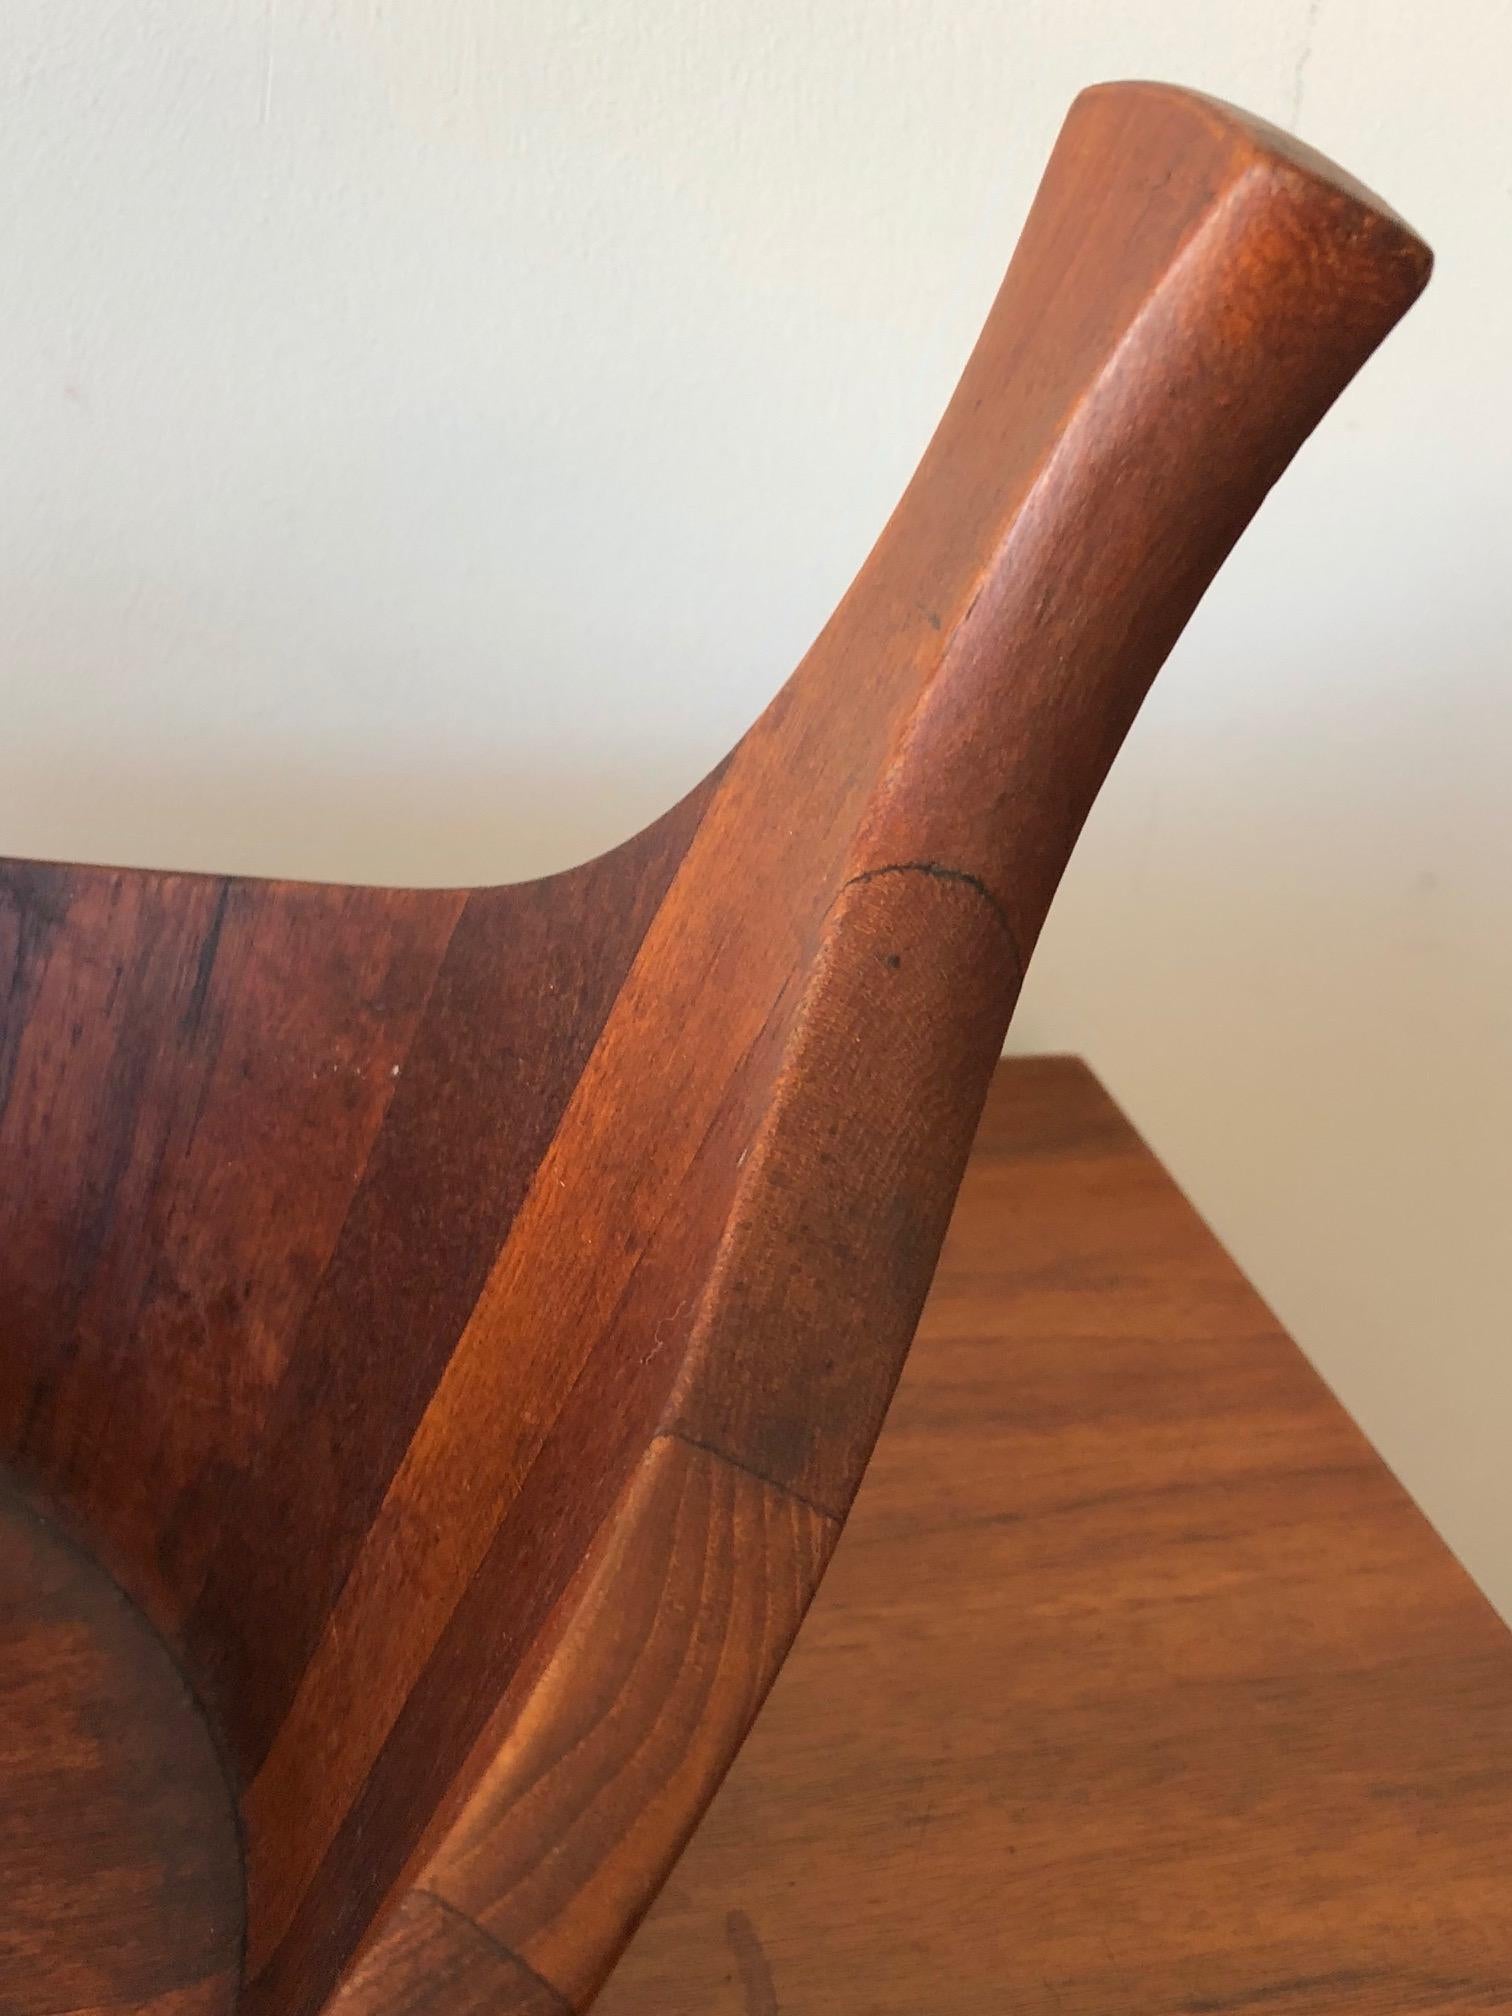 A rare and hard to find, large teak bowl by J.Quistgaard. Unusual form with raised handles and great patina.